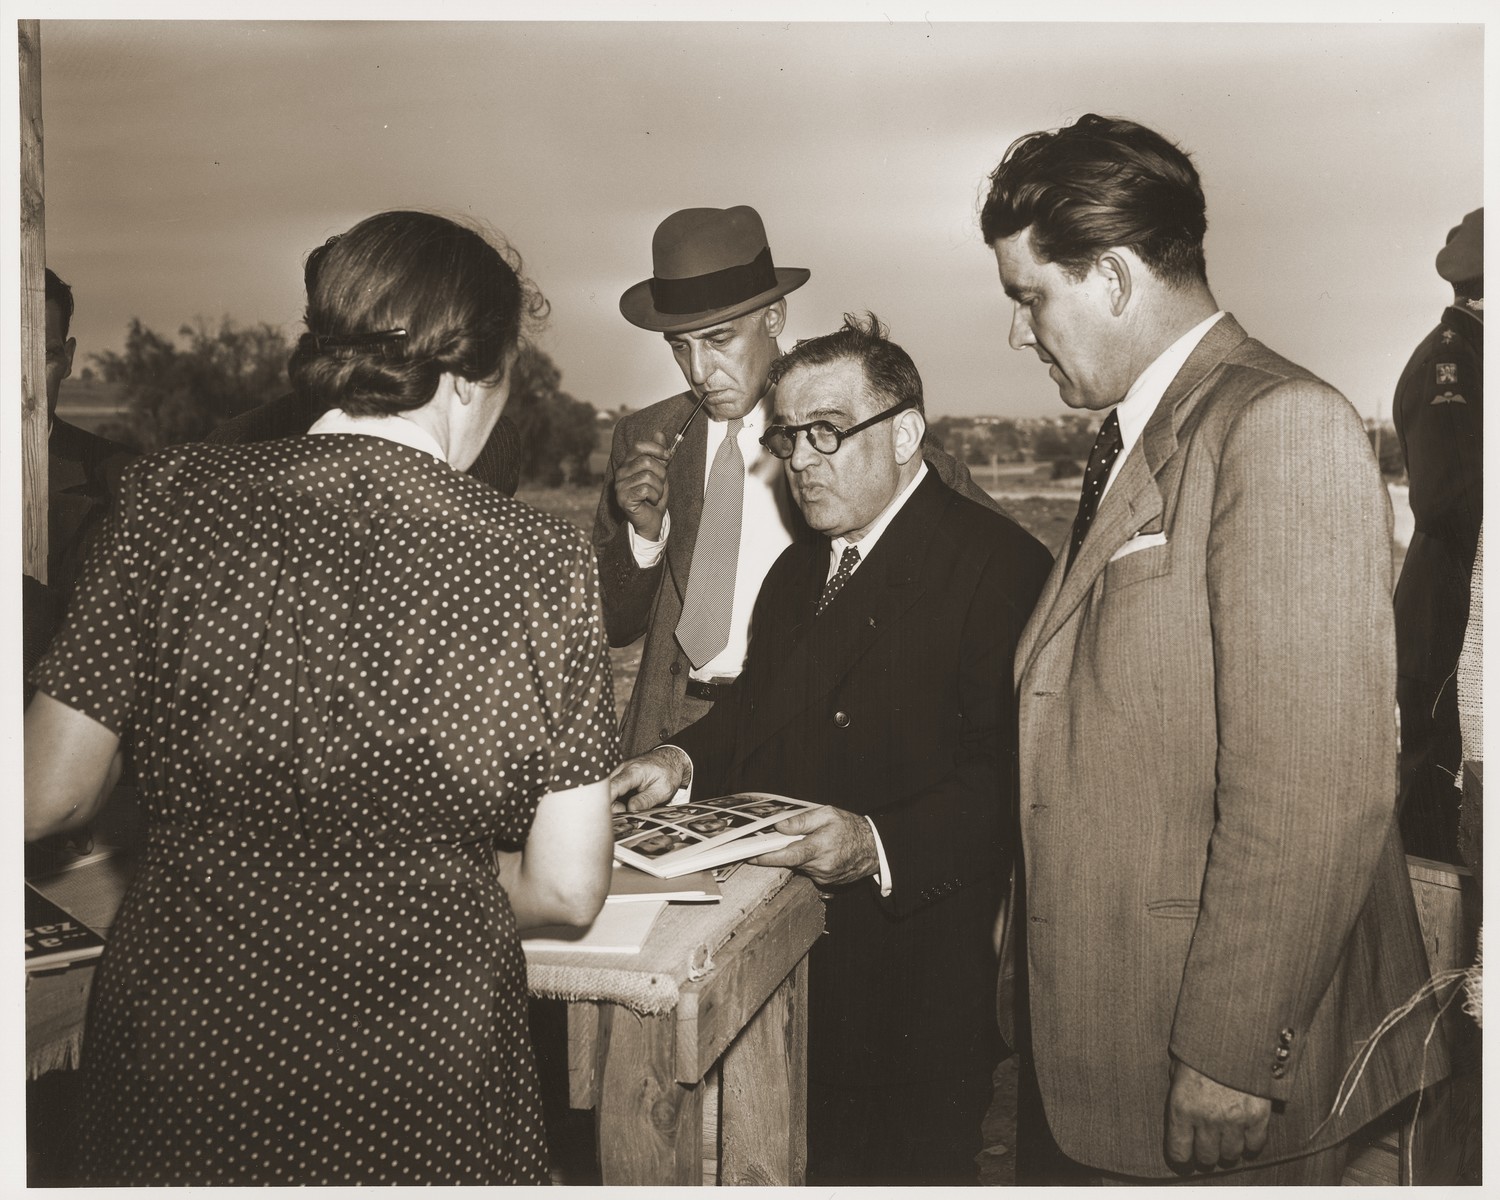 A survivor of the Lidice massacre shows Fiorello LaGuardia an album of photographs depicting the Nazi atrocity of June 1942, during an official visit by the UNRRA director to Lidice.

Also pictured is Laurence Steinhardt, U.S. Ambassador to Czechoslovakia (next to LaGuardia smoking a pipe), and Vaclav Majer, Czech minister of Food (to the right of LaGuardia).